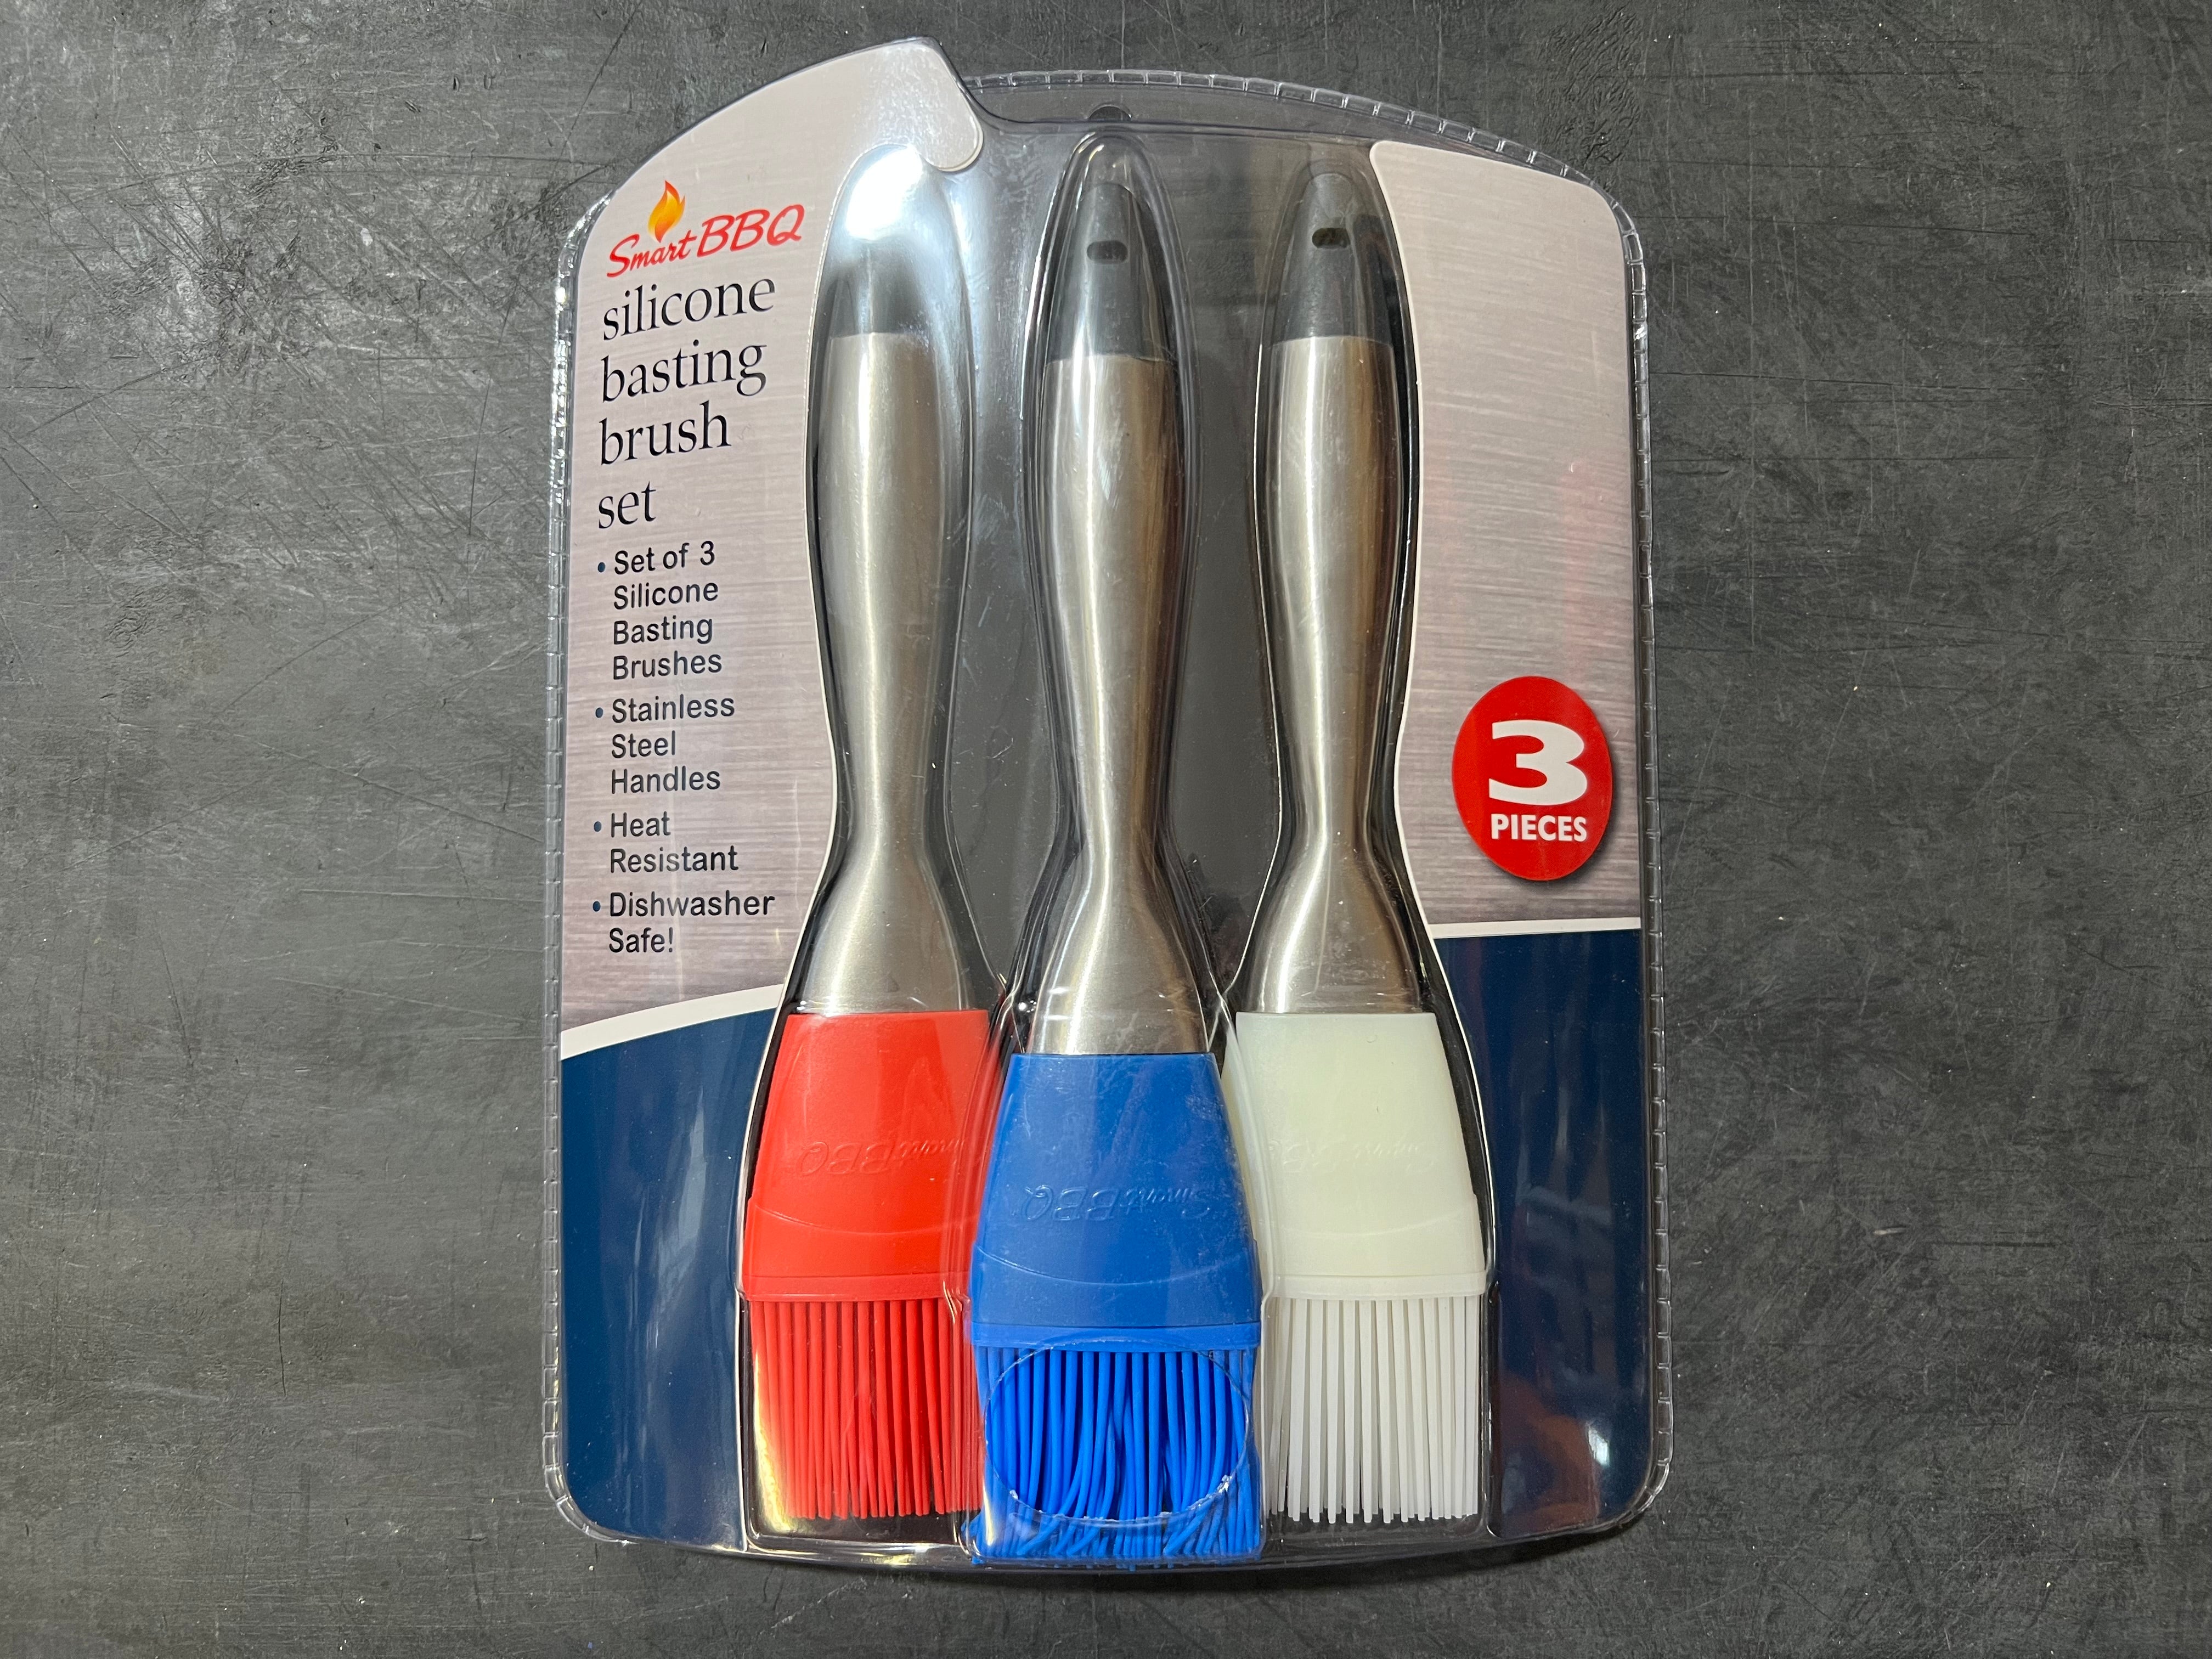 Smart BBQ SBQ-8897-CT Stainless Steel Handle 3pc.Silicone Basting Brush Set